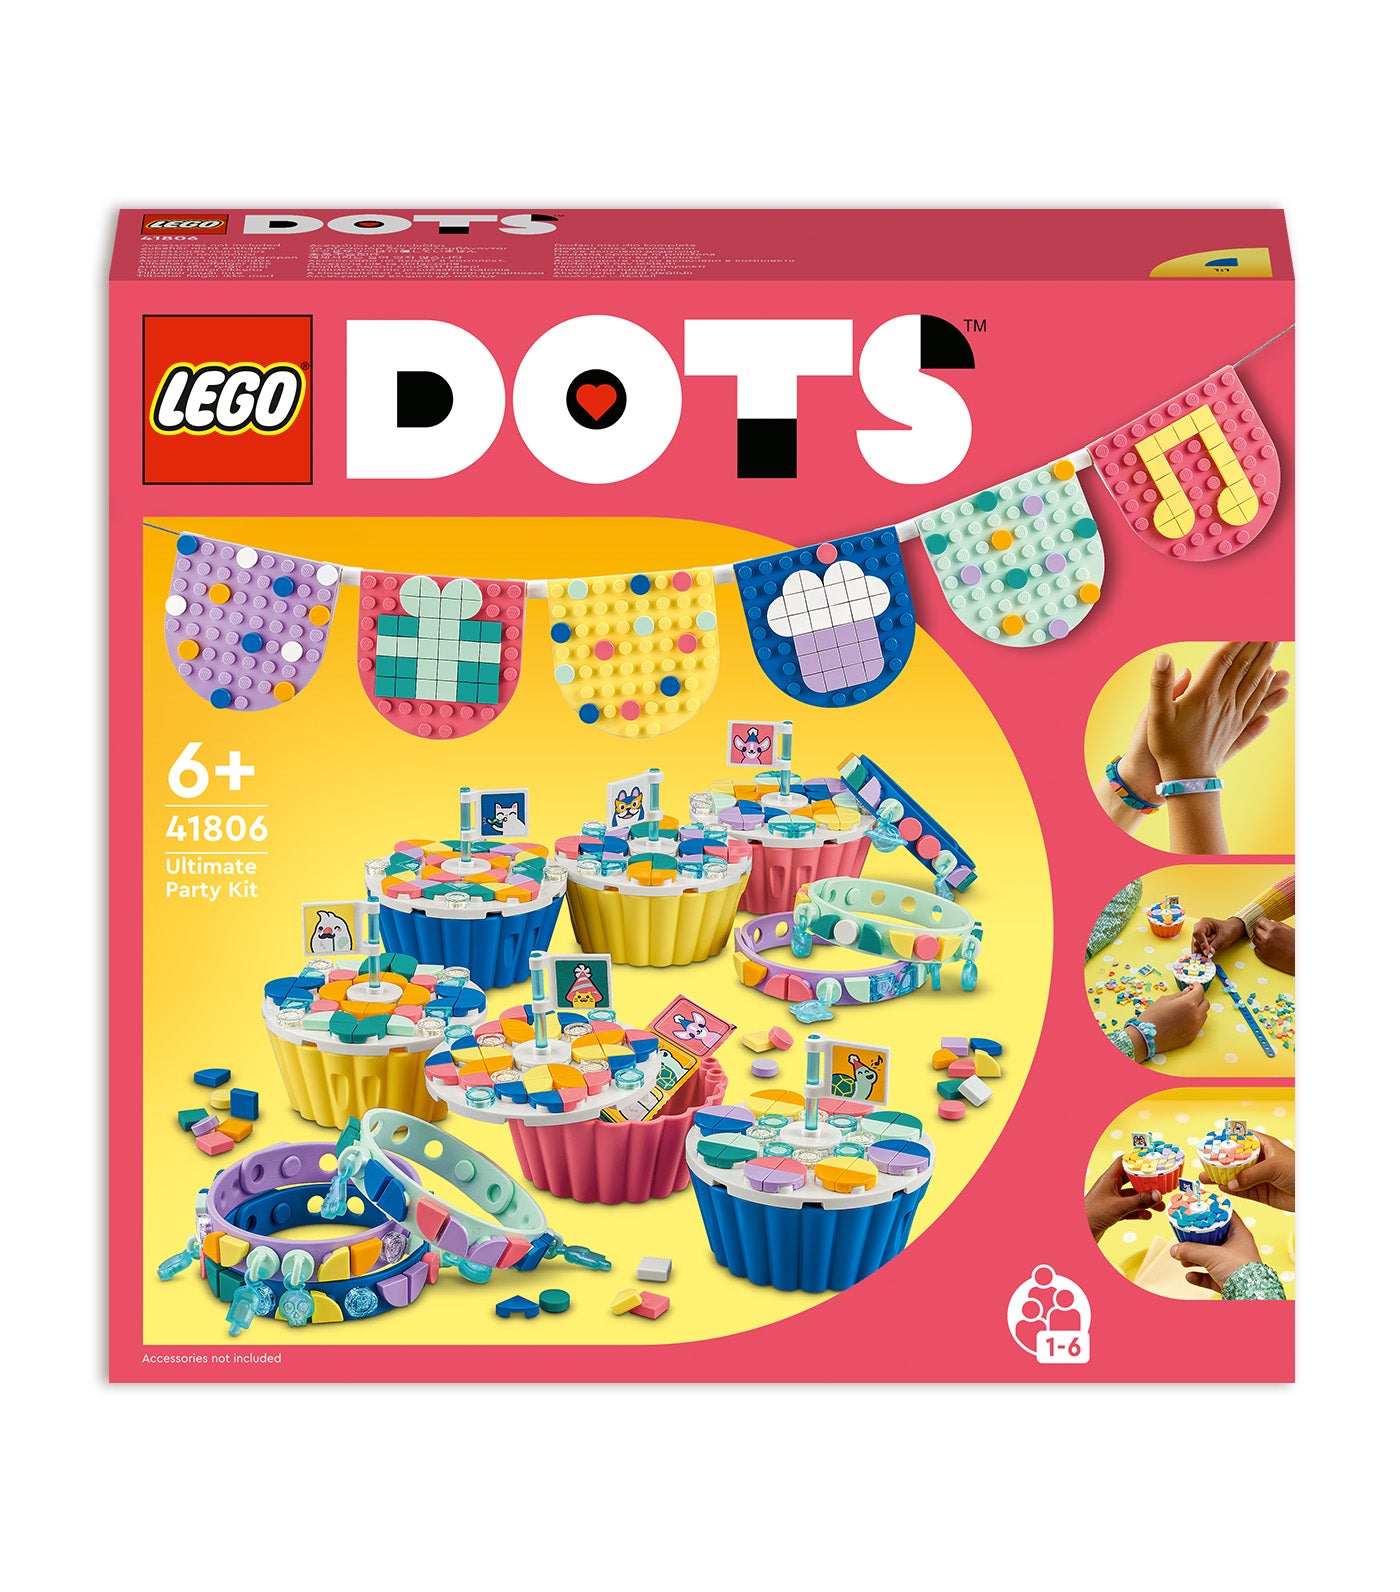 DOTS Ultimate Party Kit